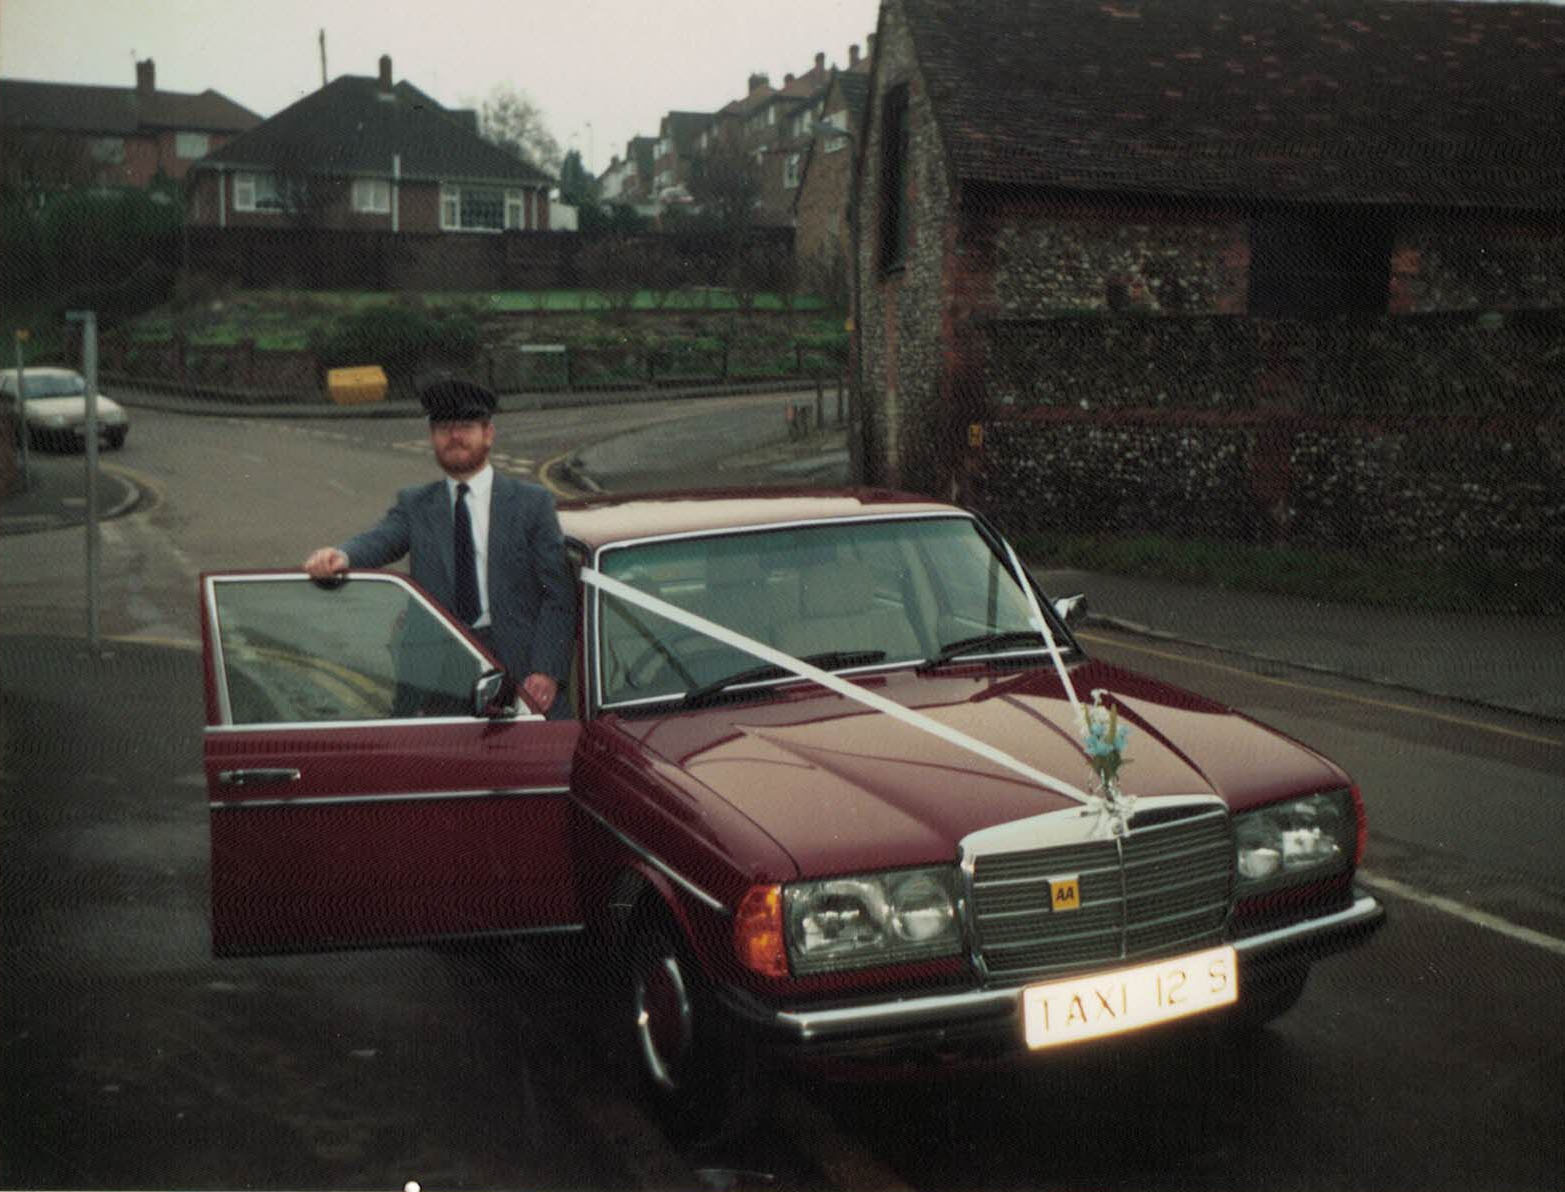 TAXI12S with driver in Copyground Lane, High Wycombe - circa 1990